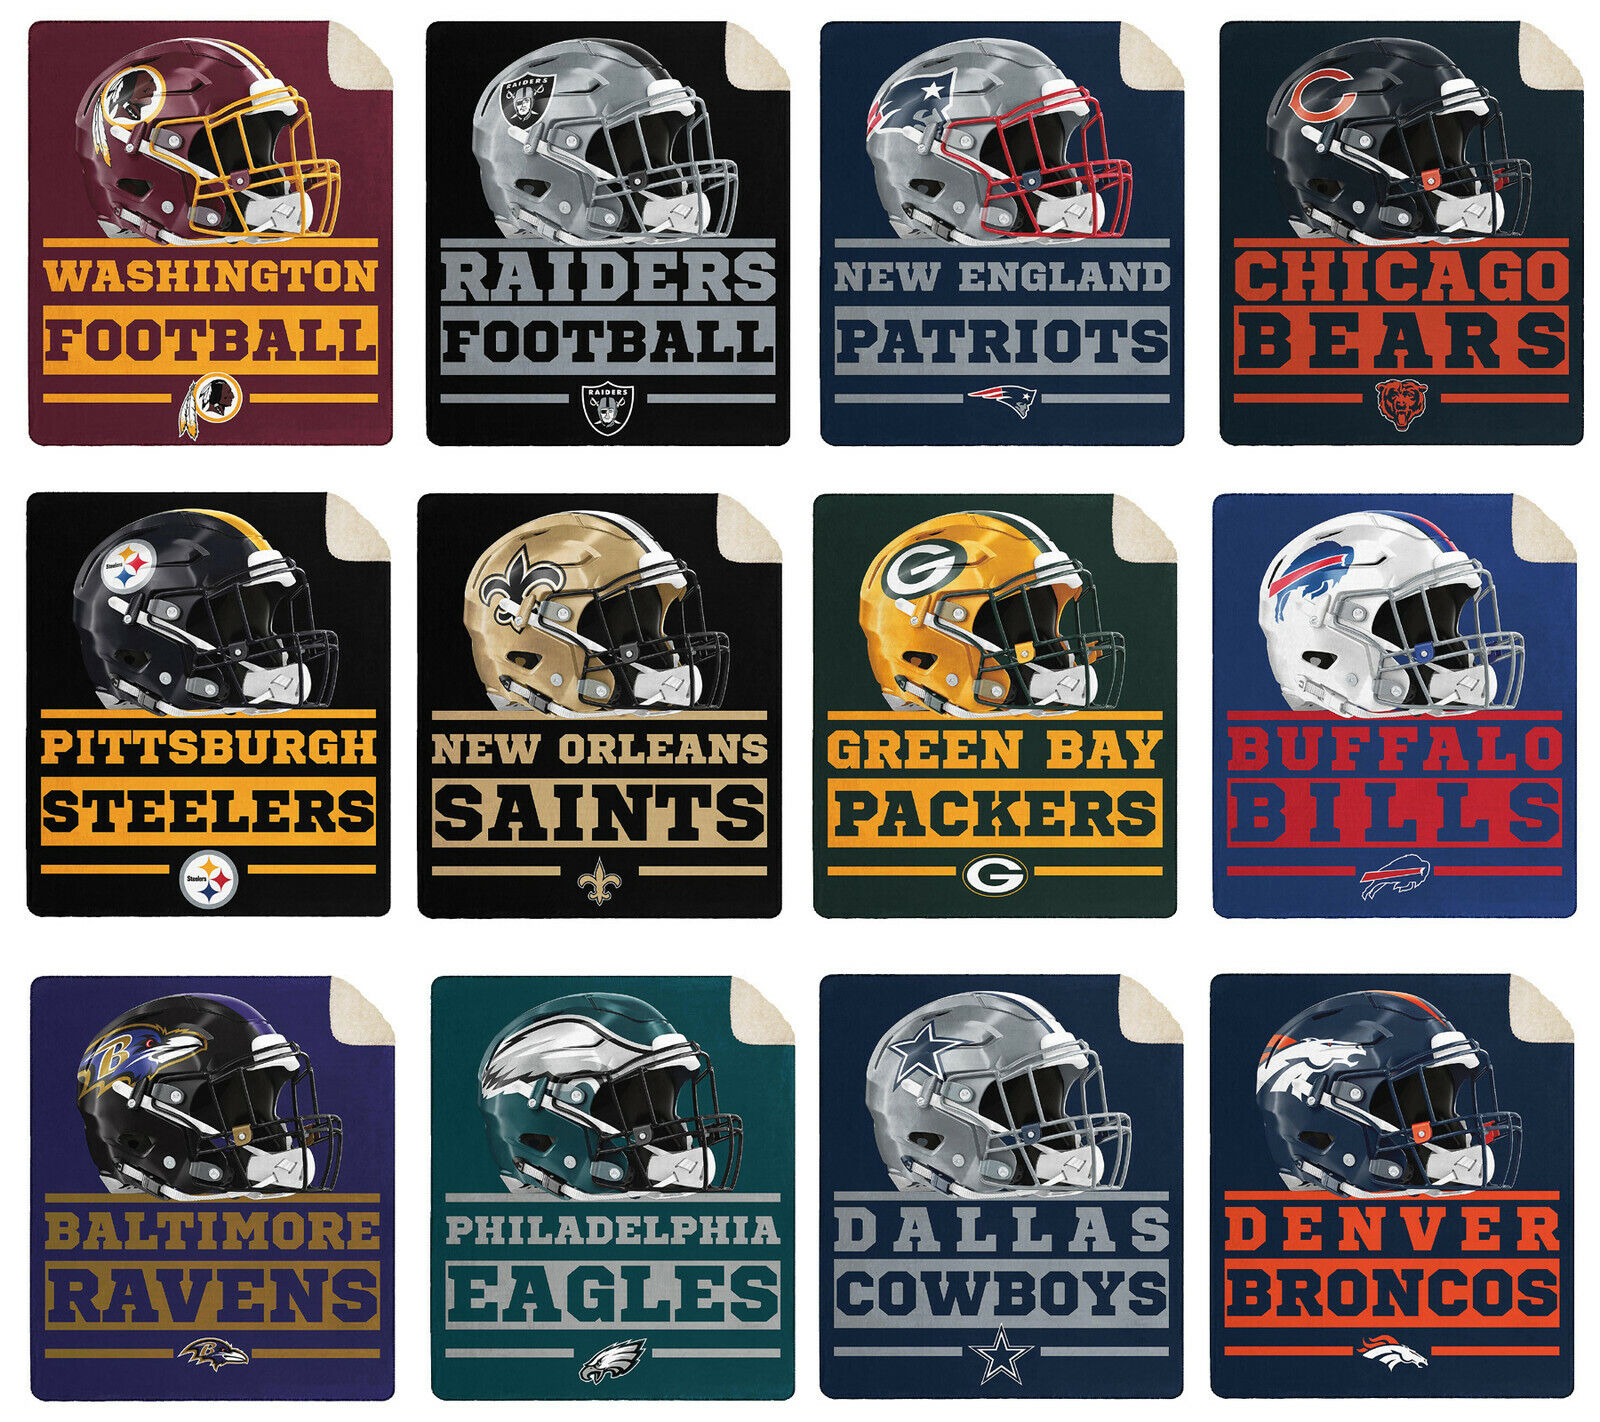 NFL PICK YOUR TEAMS Premium Super Soft Large Throw Blanket with Sherpa 60"x70"